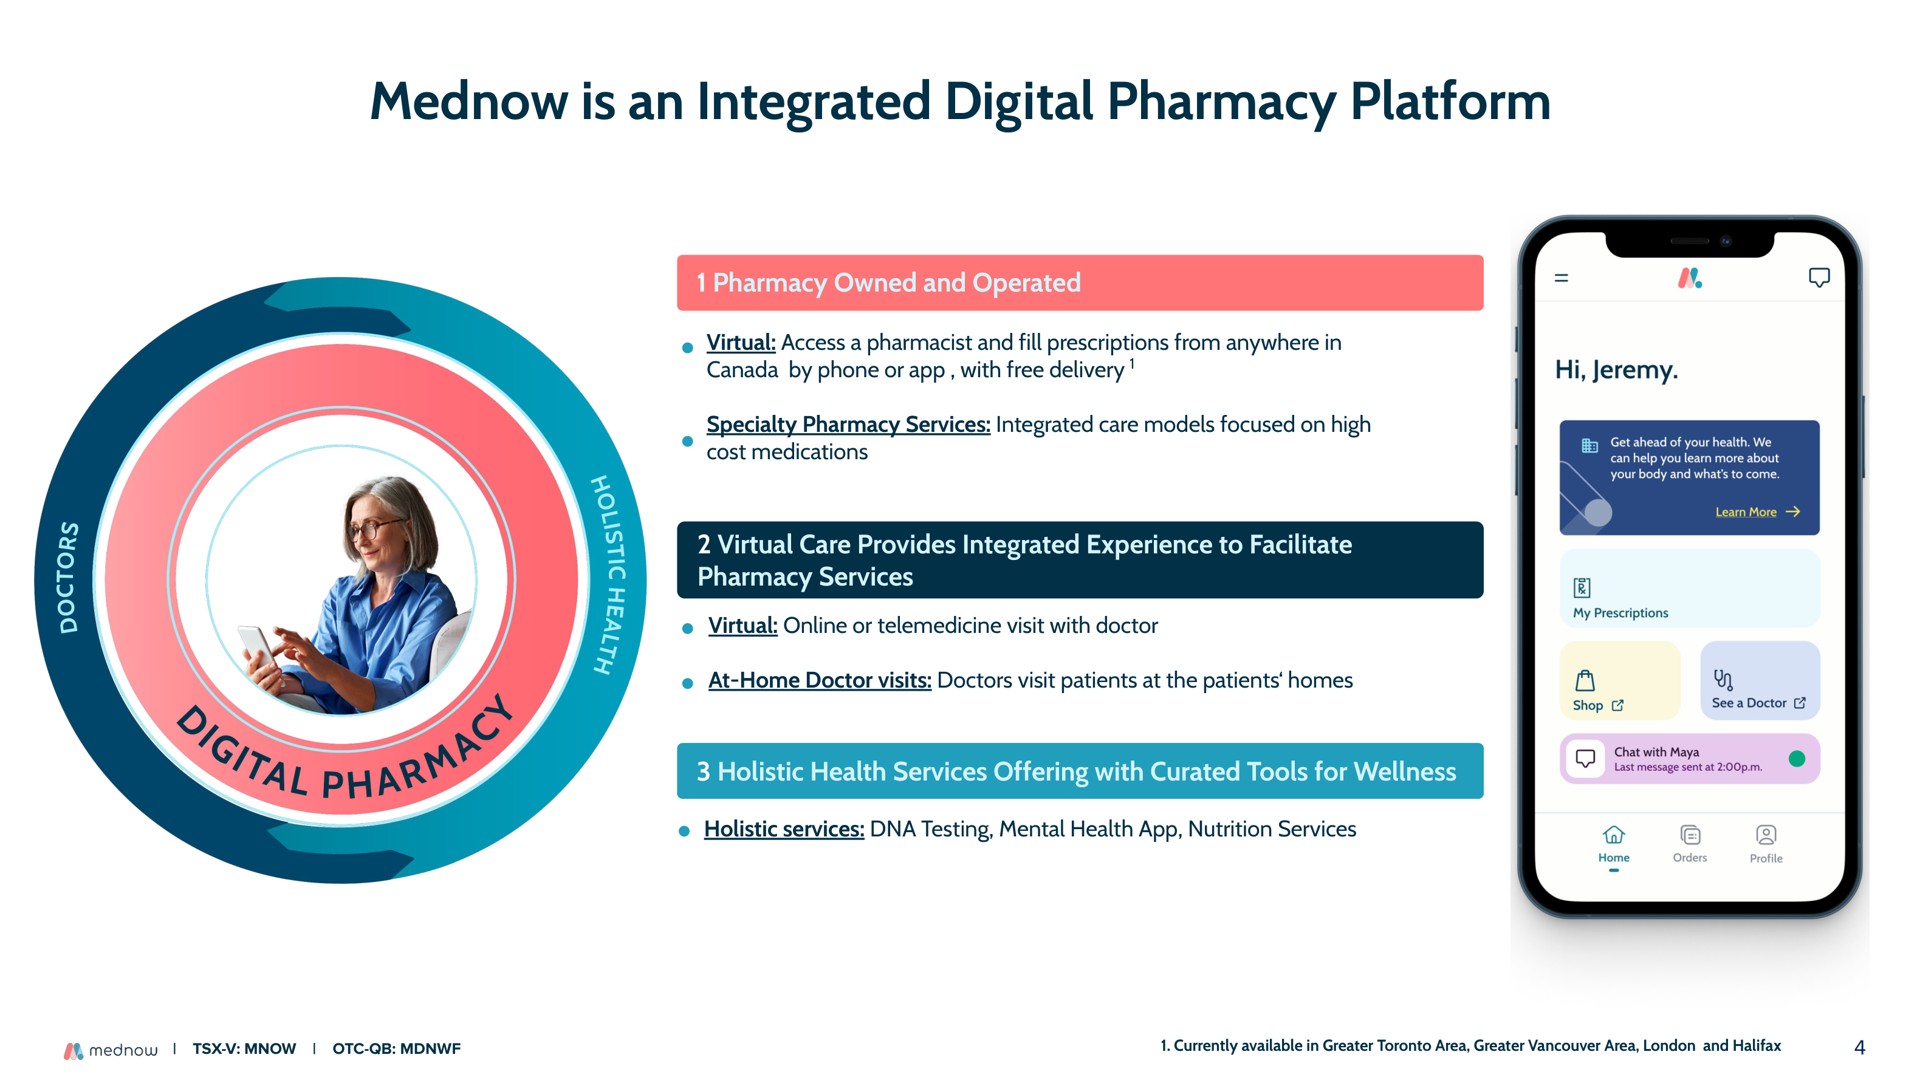 is an integrated digital pharmacy platform pharmacy owned and operated virtual access a pharmacist and fill prescriptions from anywhere in canada by phone or with free delivery specialty pharmacy services integrated care models focused on high cost medications virtual care provides integrated experience to facilitate pharmacy services virtual or visit with doctor at home doctor visits doctors visit patients at the patients homes holistic health services offering with tools for wellness holistic services testing mental health nutrition services | Mednow